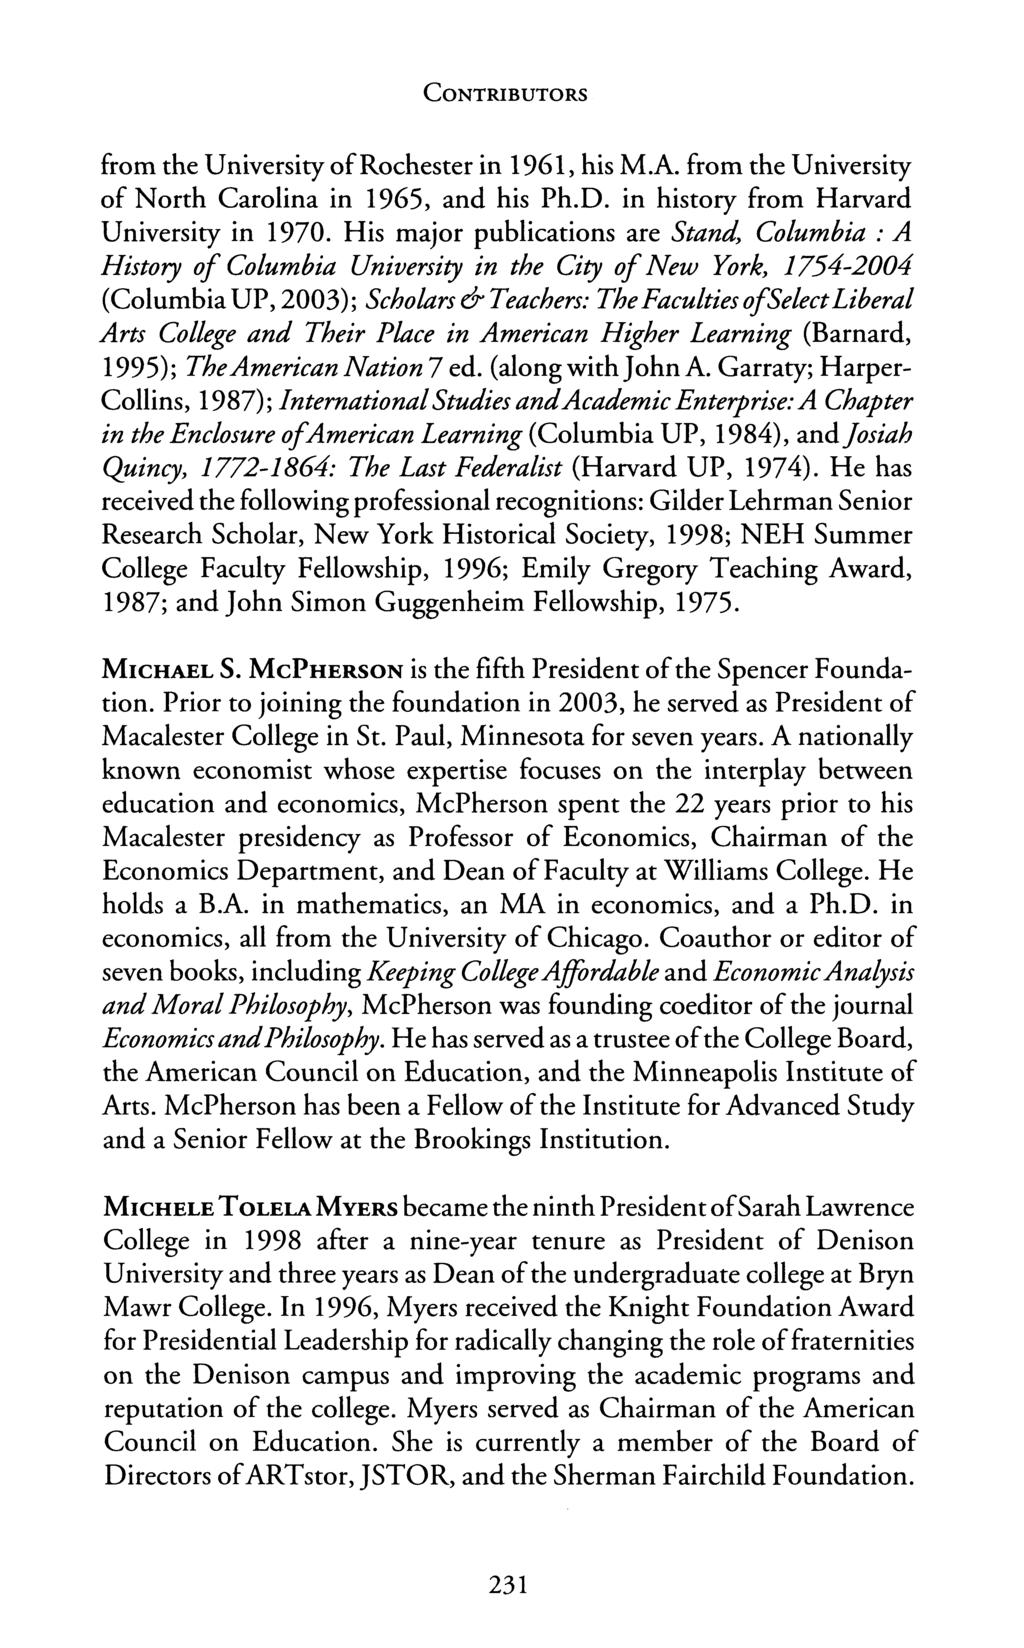 CONTRIBUTORS from the University of Rochester in 1961, his M.A. from the University of North Carolina in 1965, and his Ph.D. in history from Harvard University in 1970.